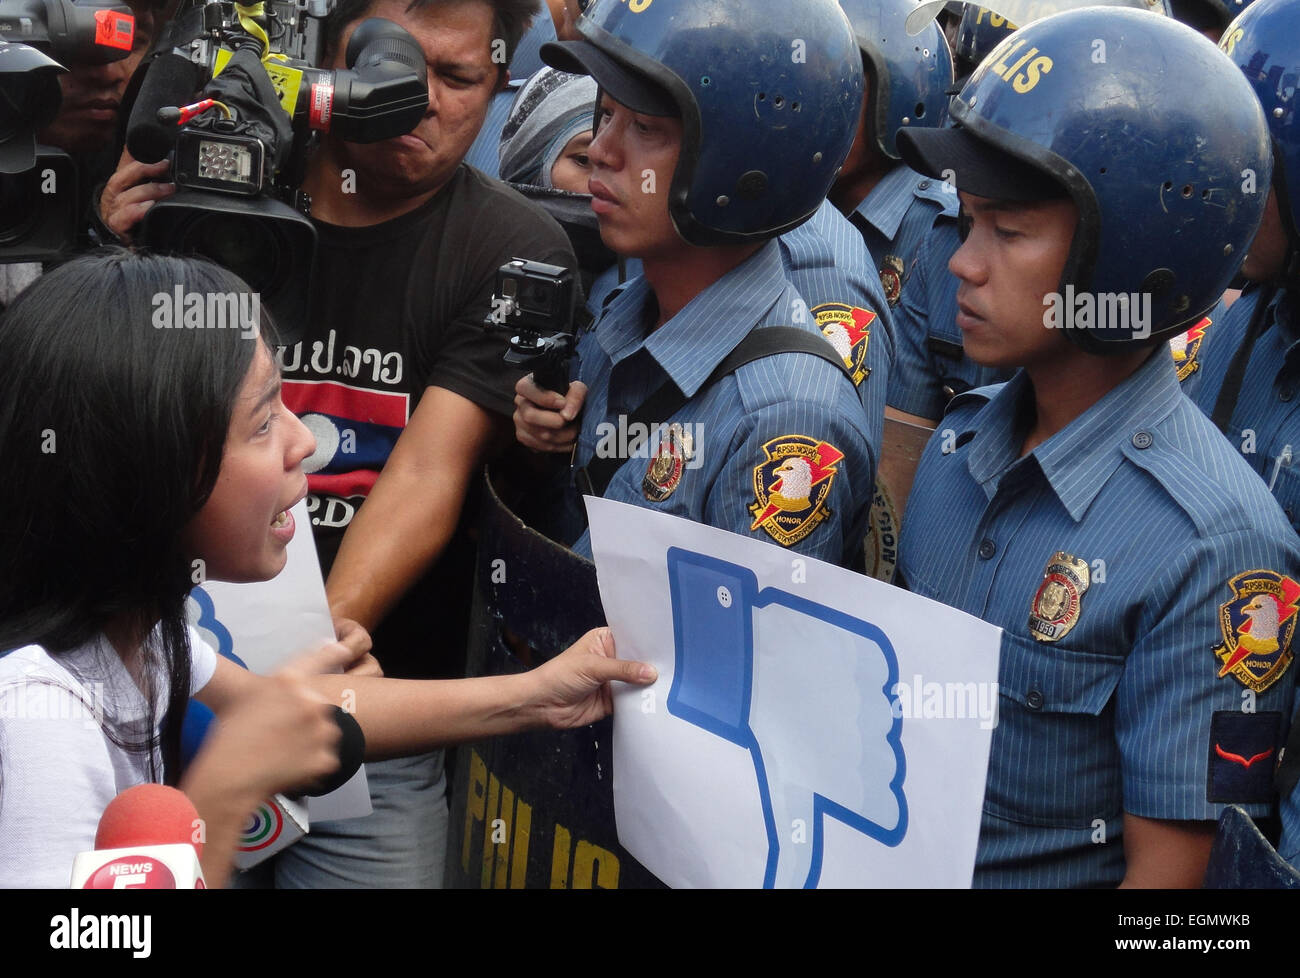 Manila, Philippines. 27th February, 2015. A Filipino protester shouts at a policeman during a rally at Mendiola Bridge near Malacanang Palace. The protesters are calling for the resignation of President Benigno Aquino III over the Mamasapano incident that resulted in the deaths of wanted Malaysian bombmaker Zulkifri 'Marwan' bin Hir, 44 police commandos, 18 Muslim rebels, and 8 civilians. Credit:  Richard James Mendoza/Pacific Press/Alamy Live News Stock Photo